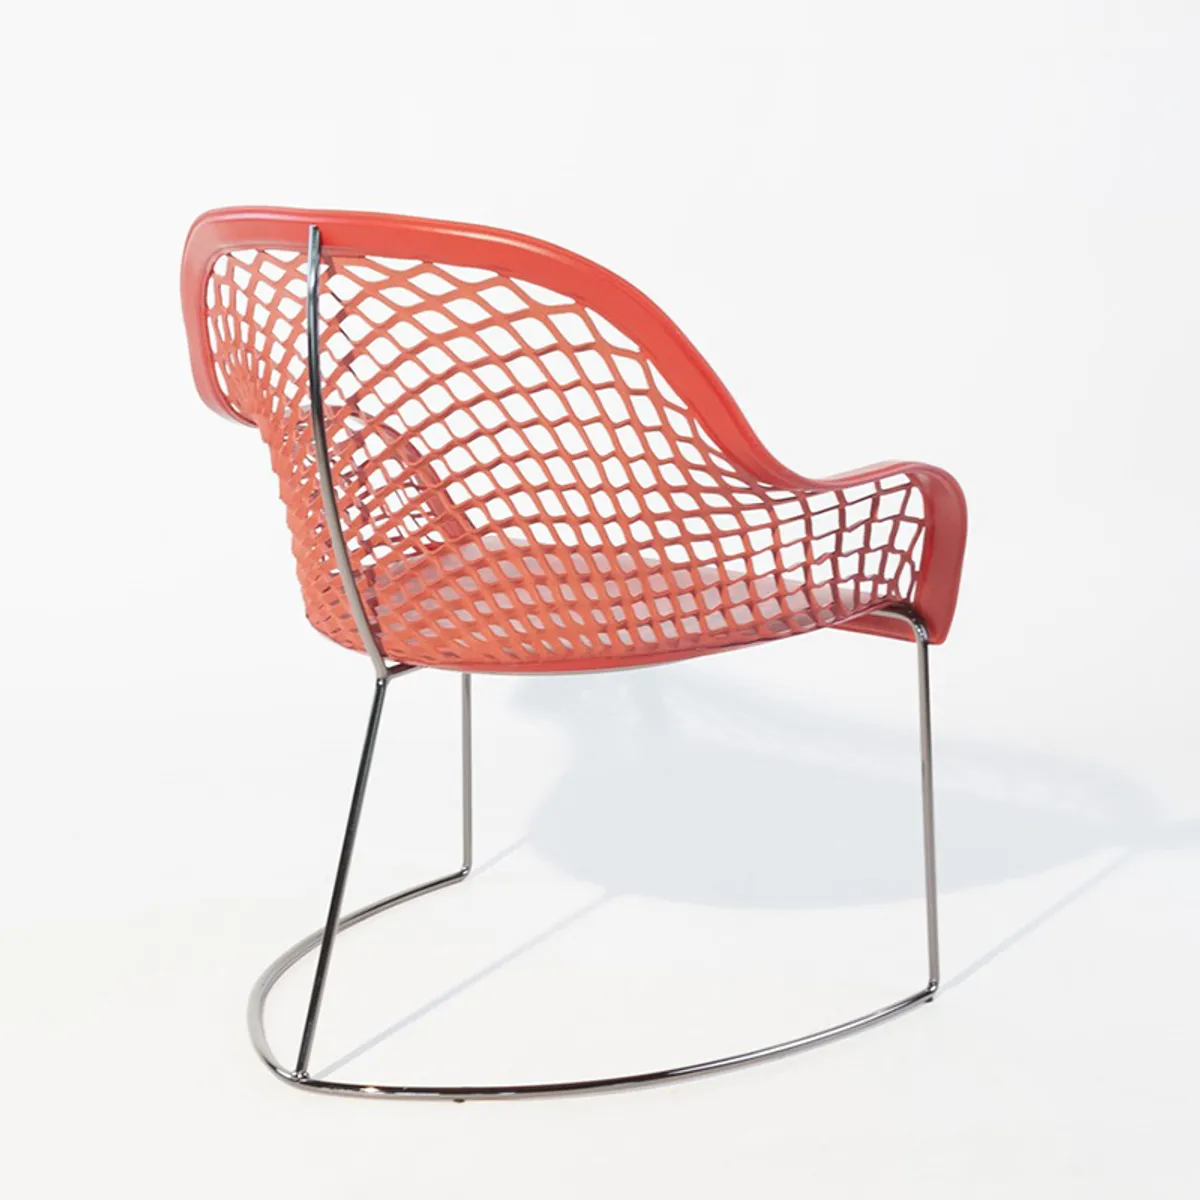 Guapa Red Lounge Chair Inside Out Contracts 014